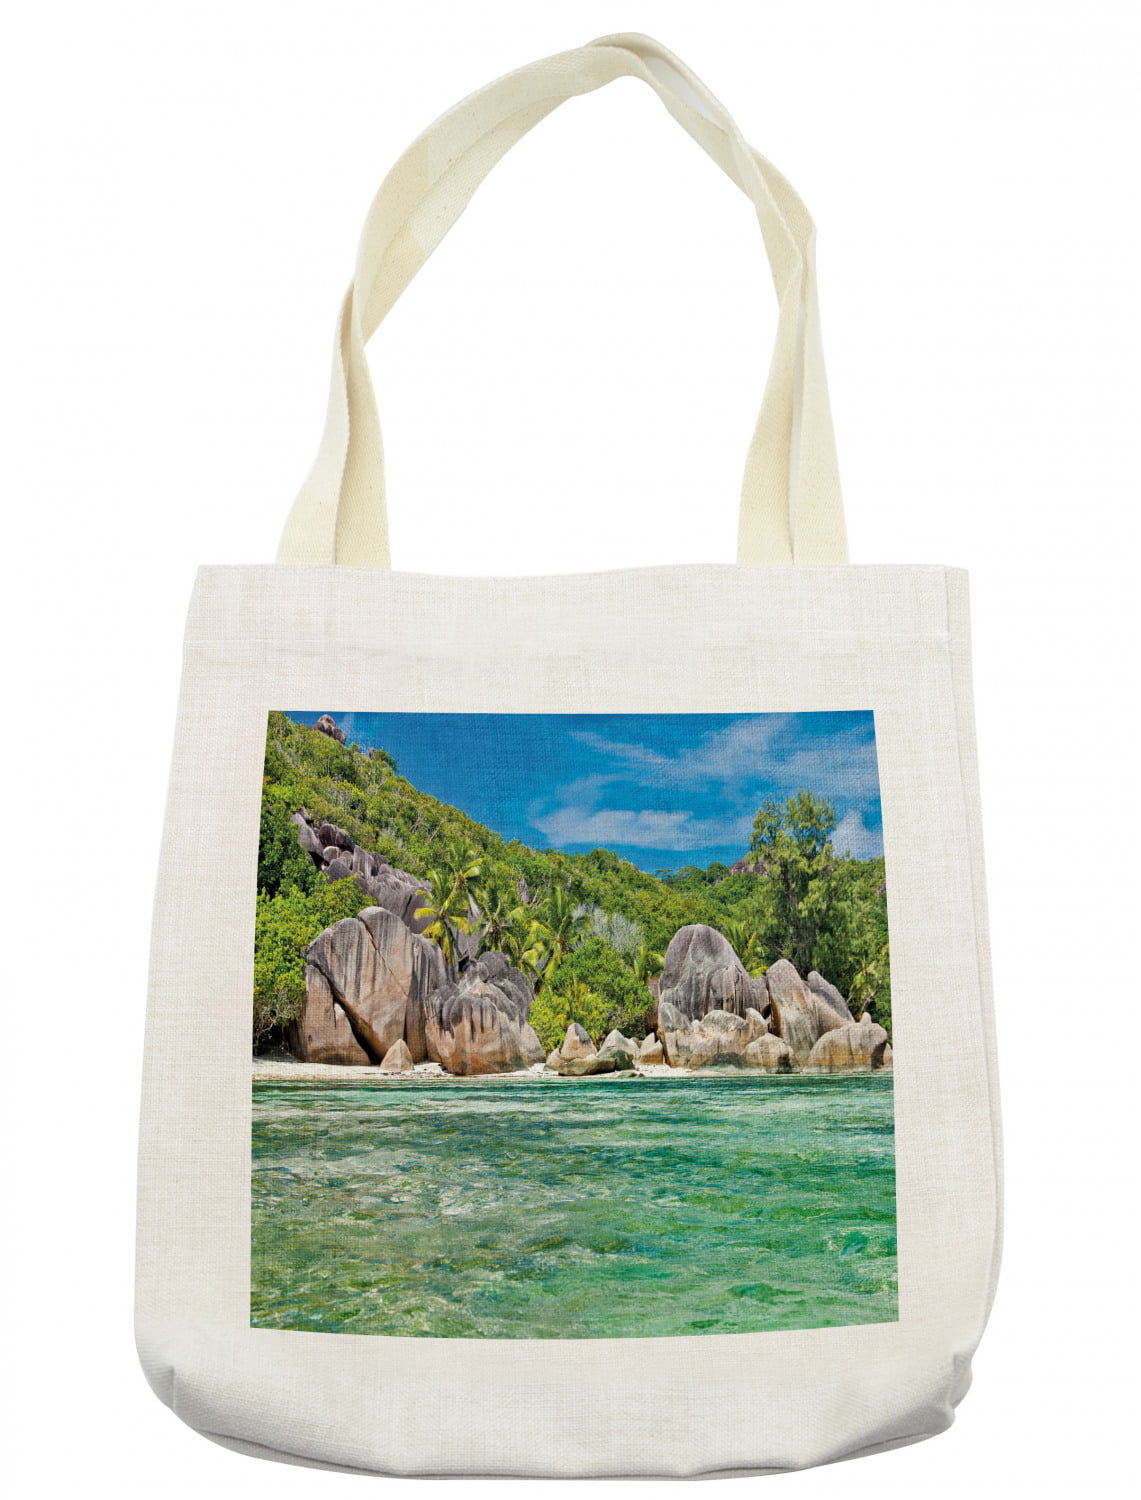 Clear Tote Bag for Travel and Beach by Surcotto - TSA Approved